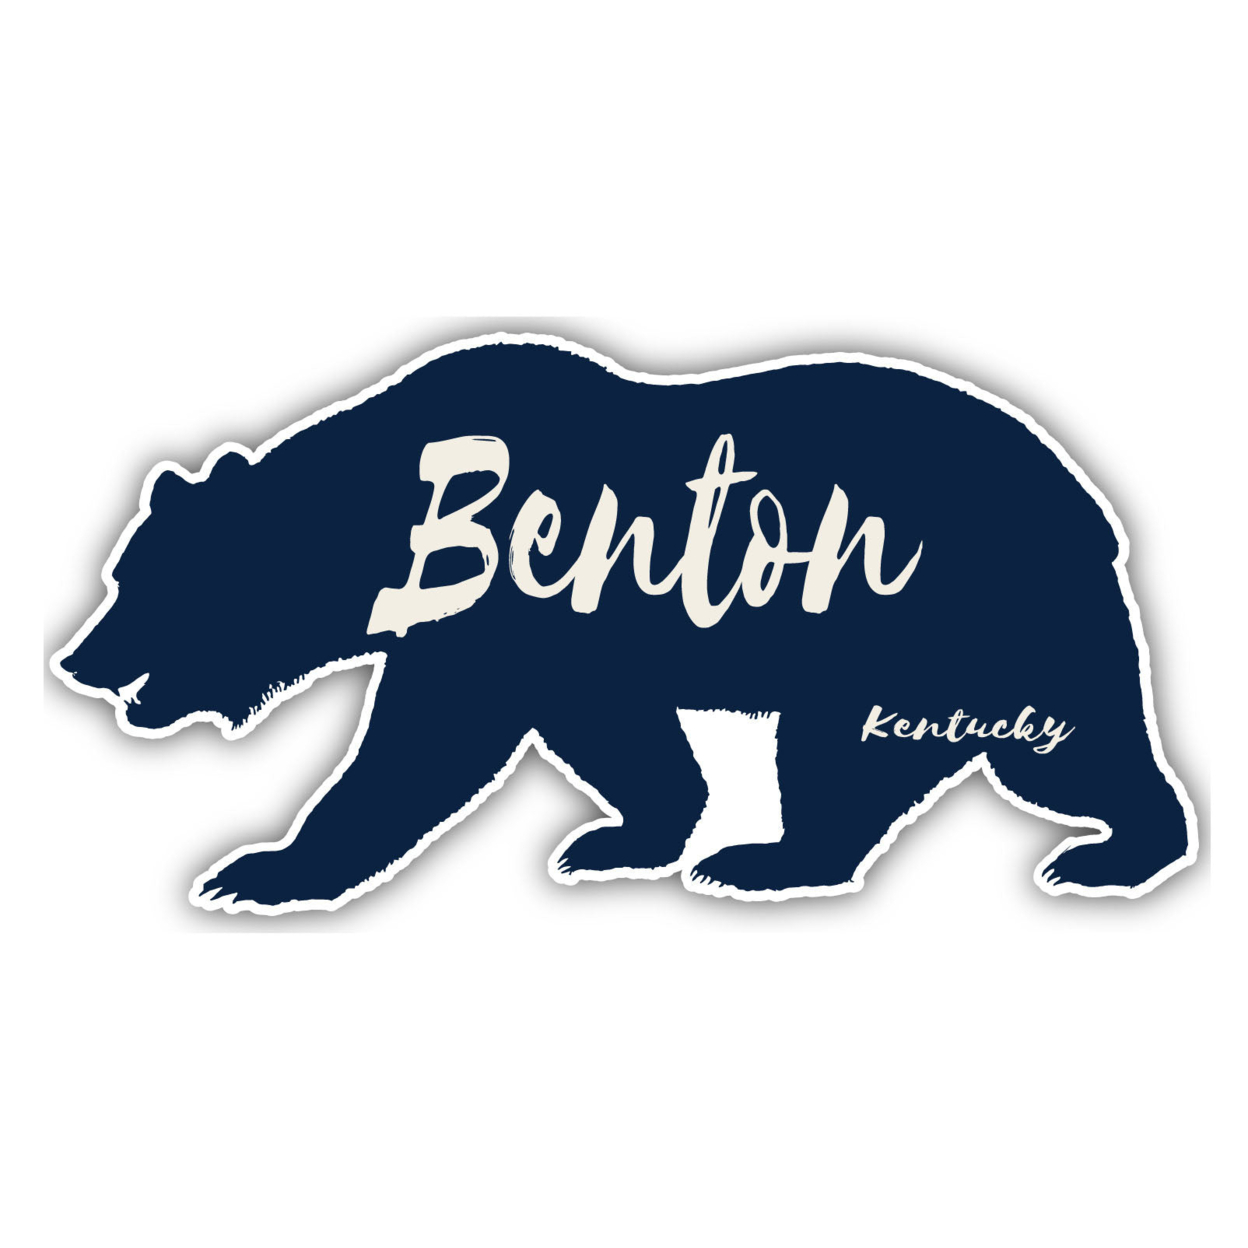 Benton Kentucky Souvenir Decorative Stickers (Choose Theme And Size) - 4-Pack, 4-Inch, Great Outdoors